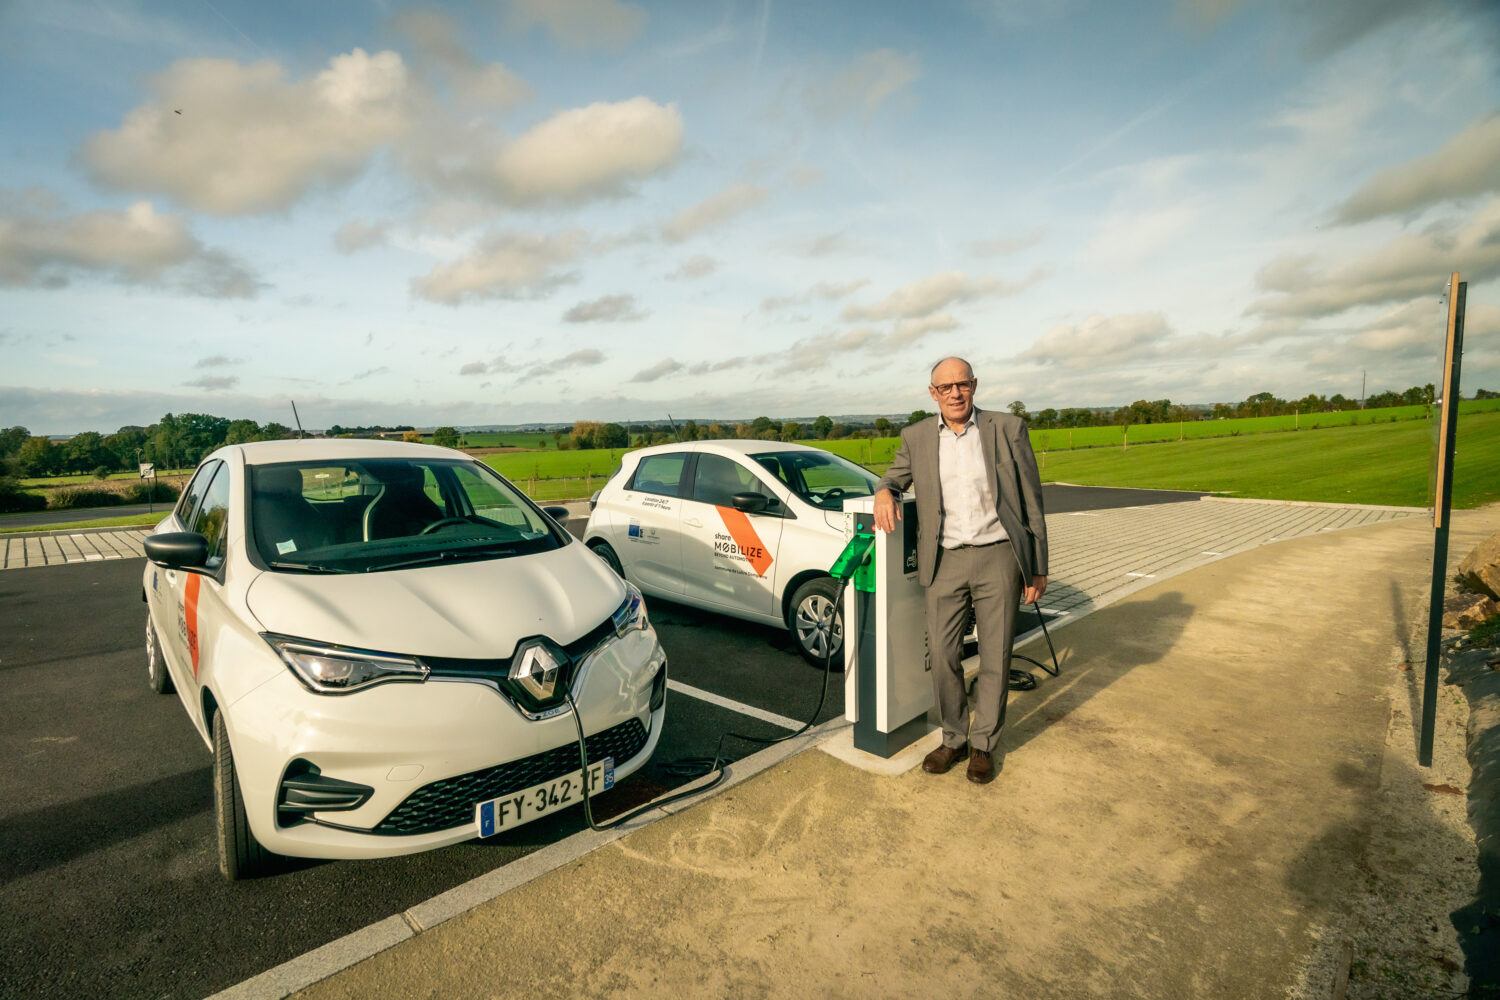 2021 - Story Mobilize -  Rural communities adopting shared electric mobility solutions